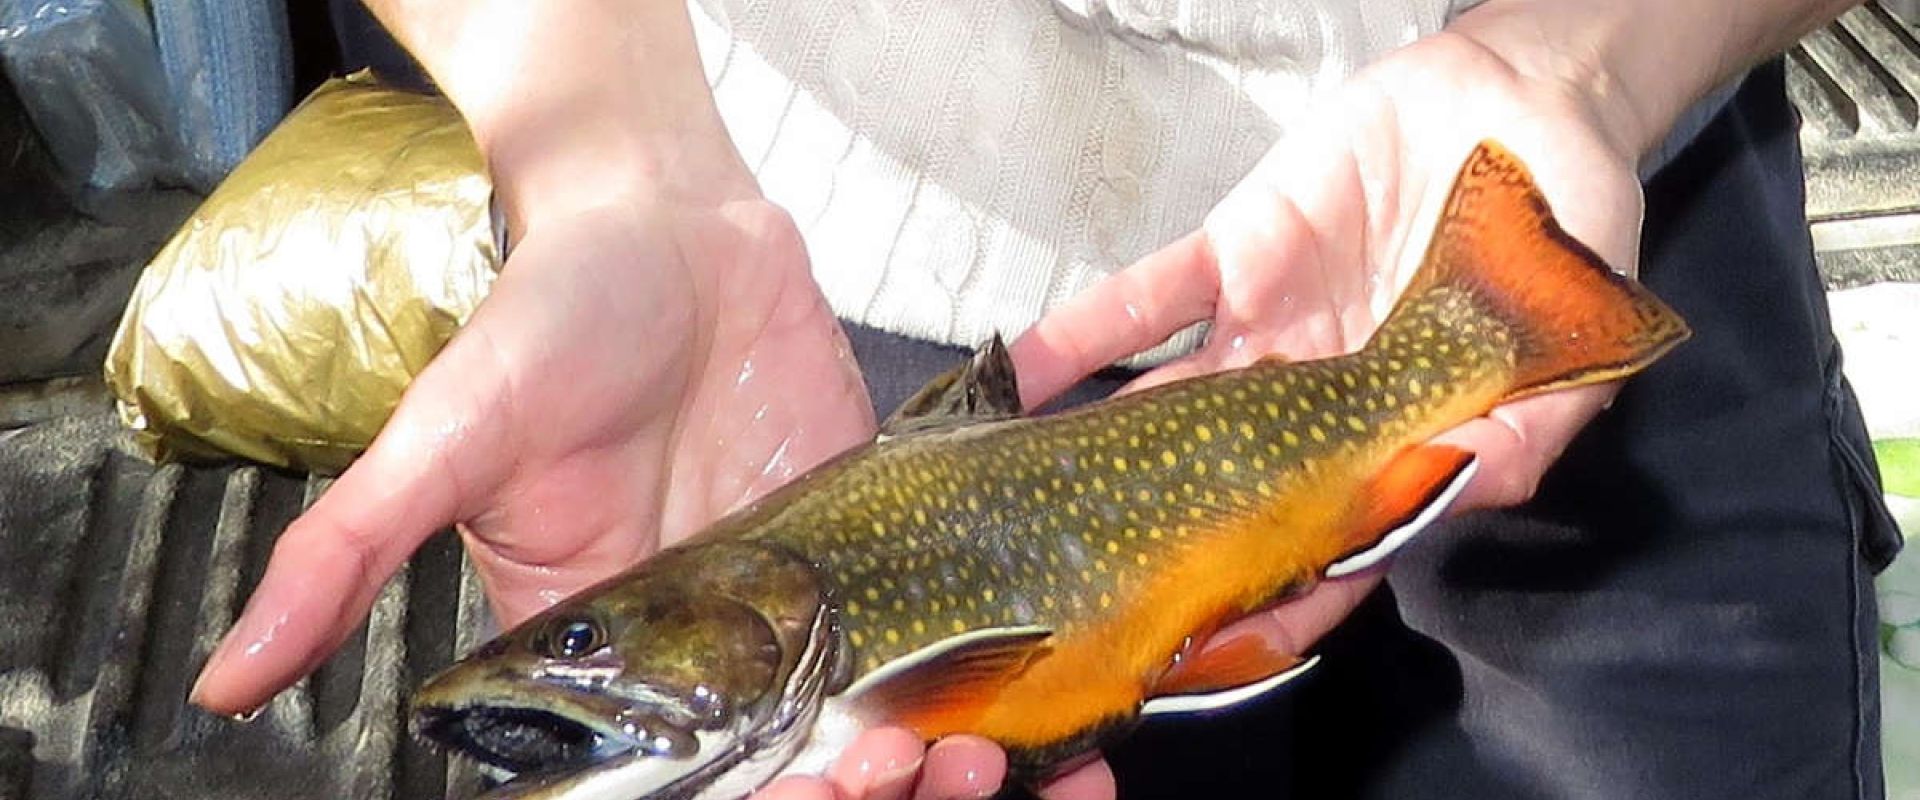 A 30-cm long brook trout held in a person's hands.